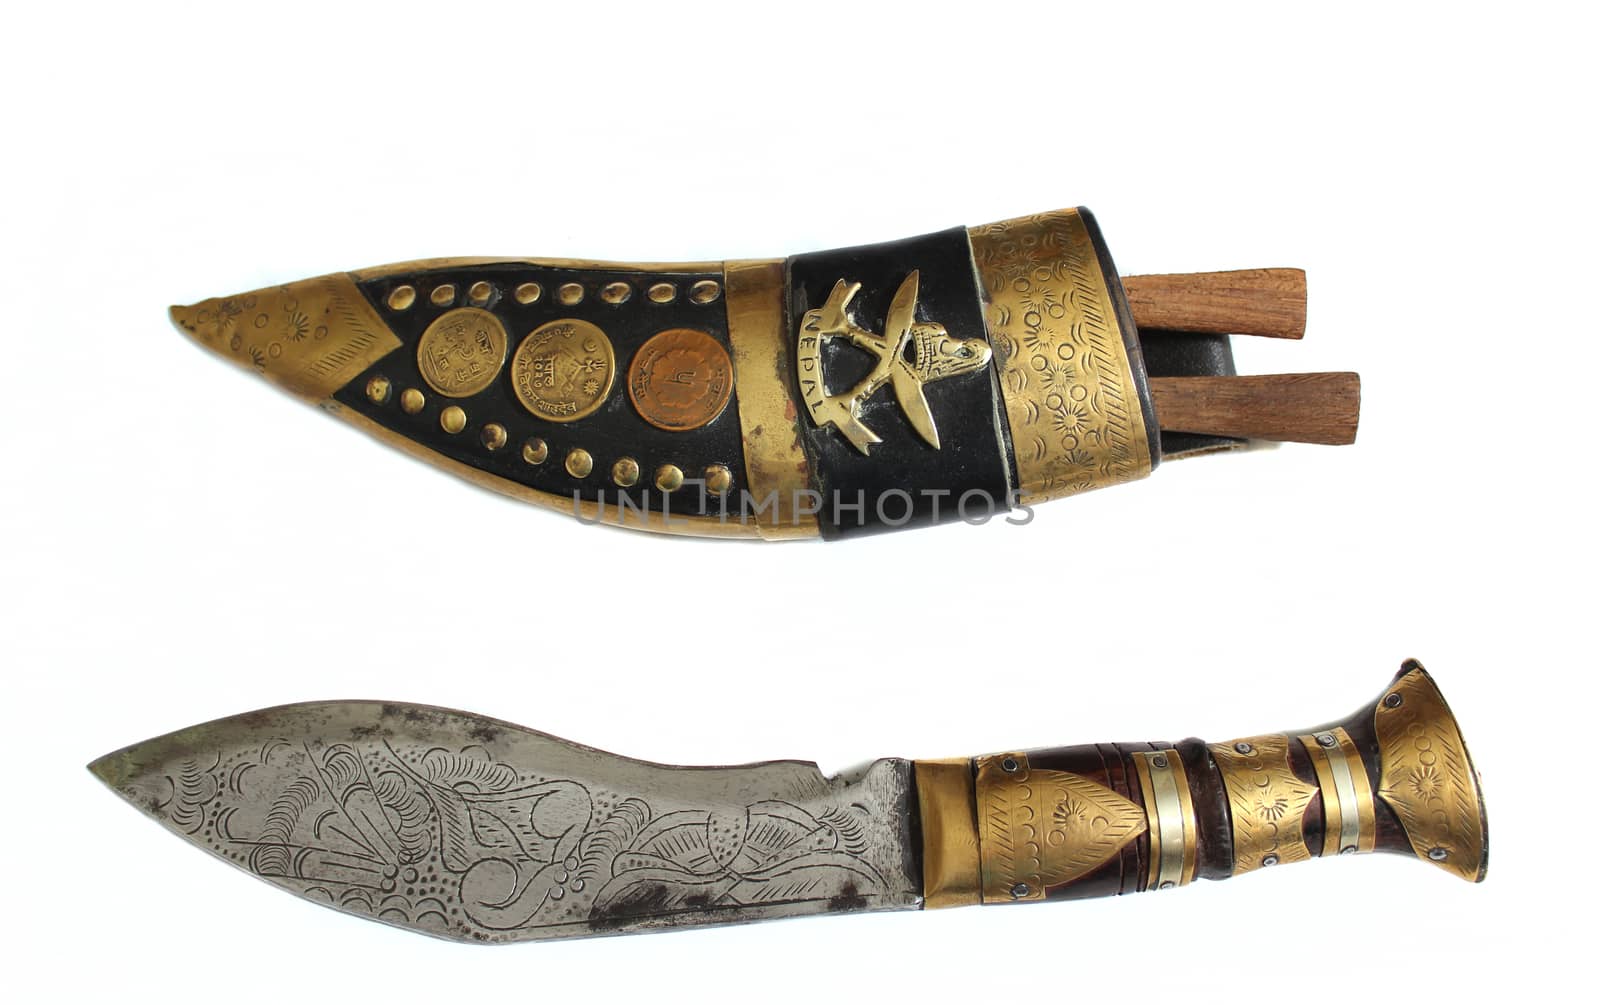 Bolo Knife by Marti157900